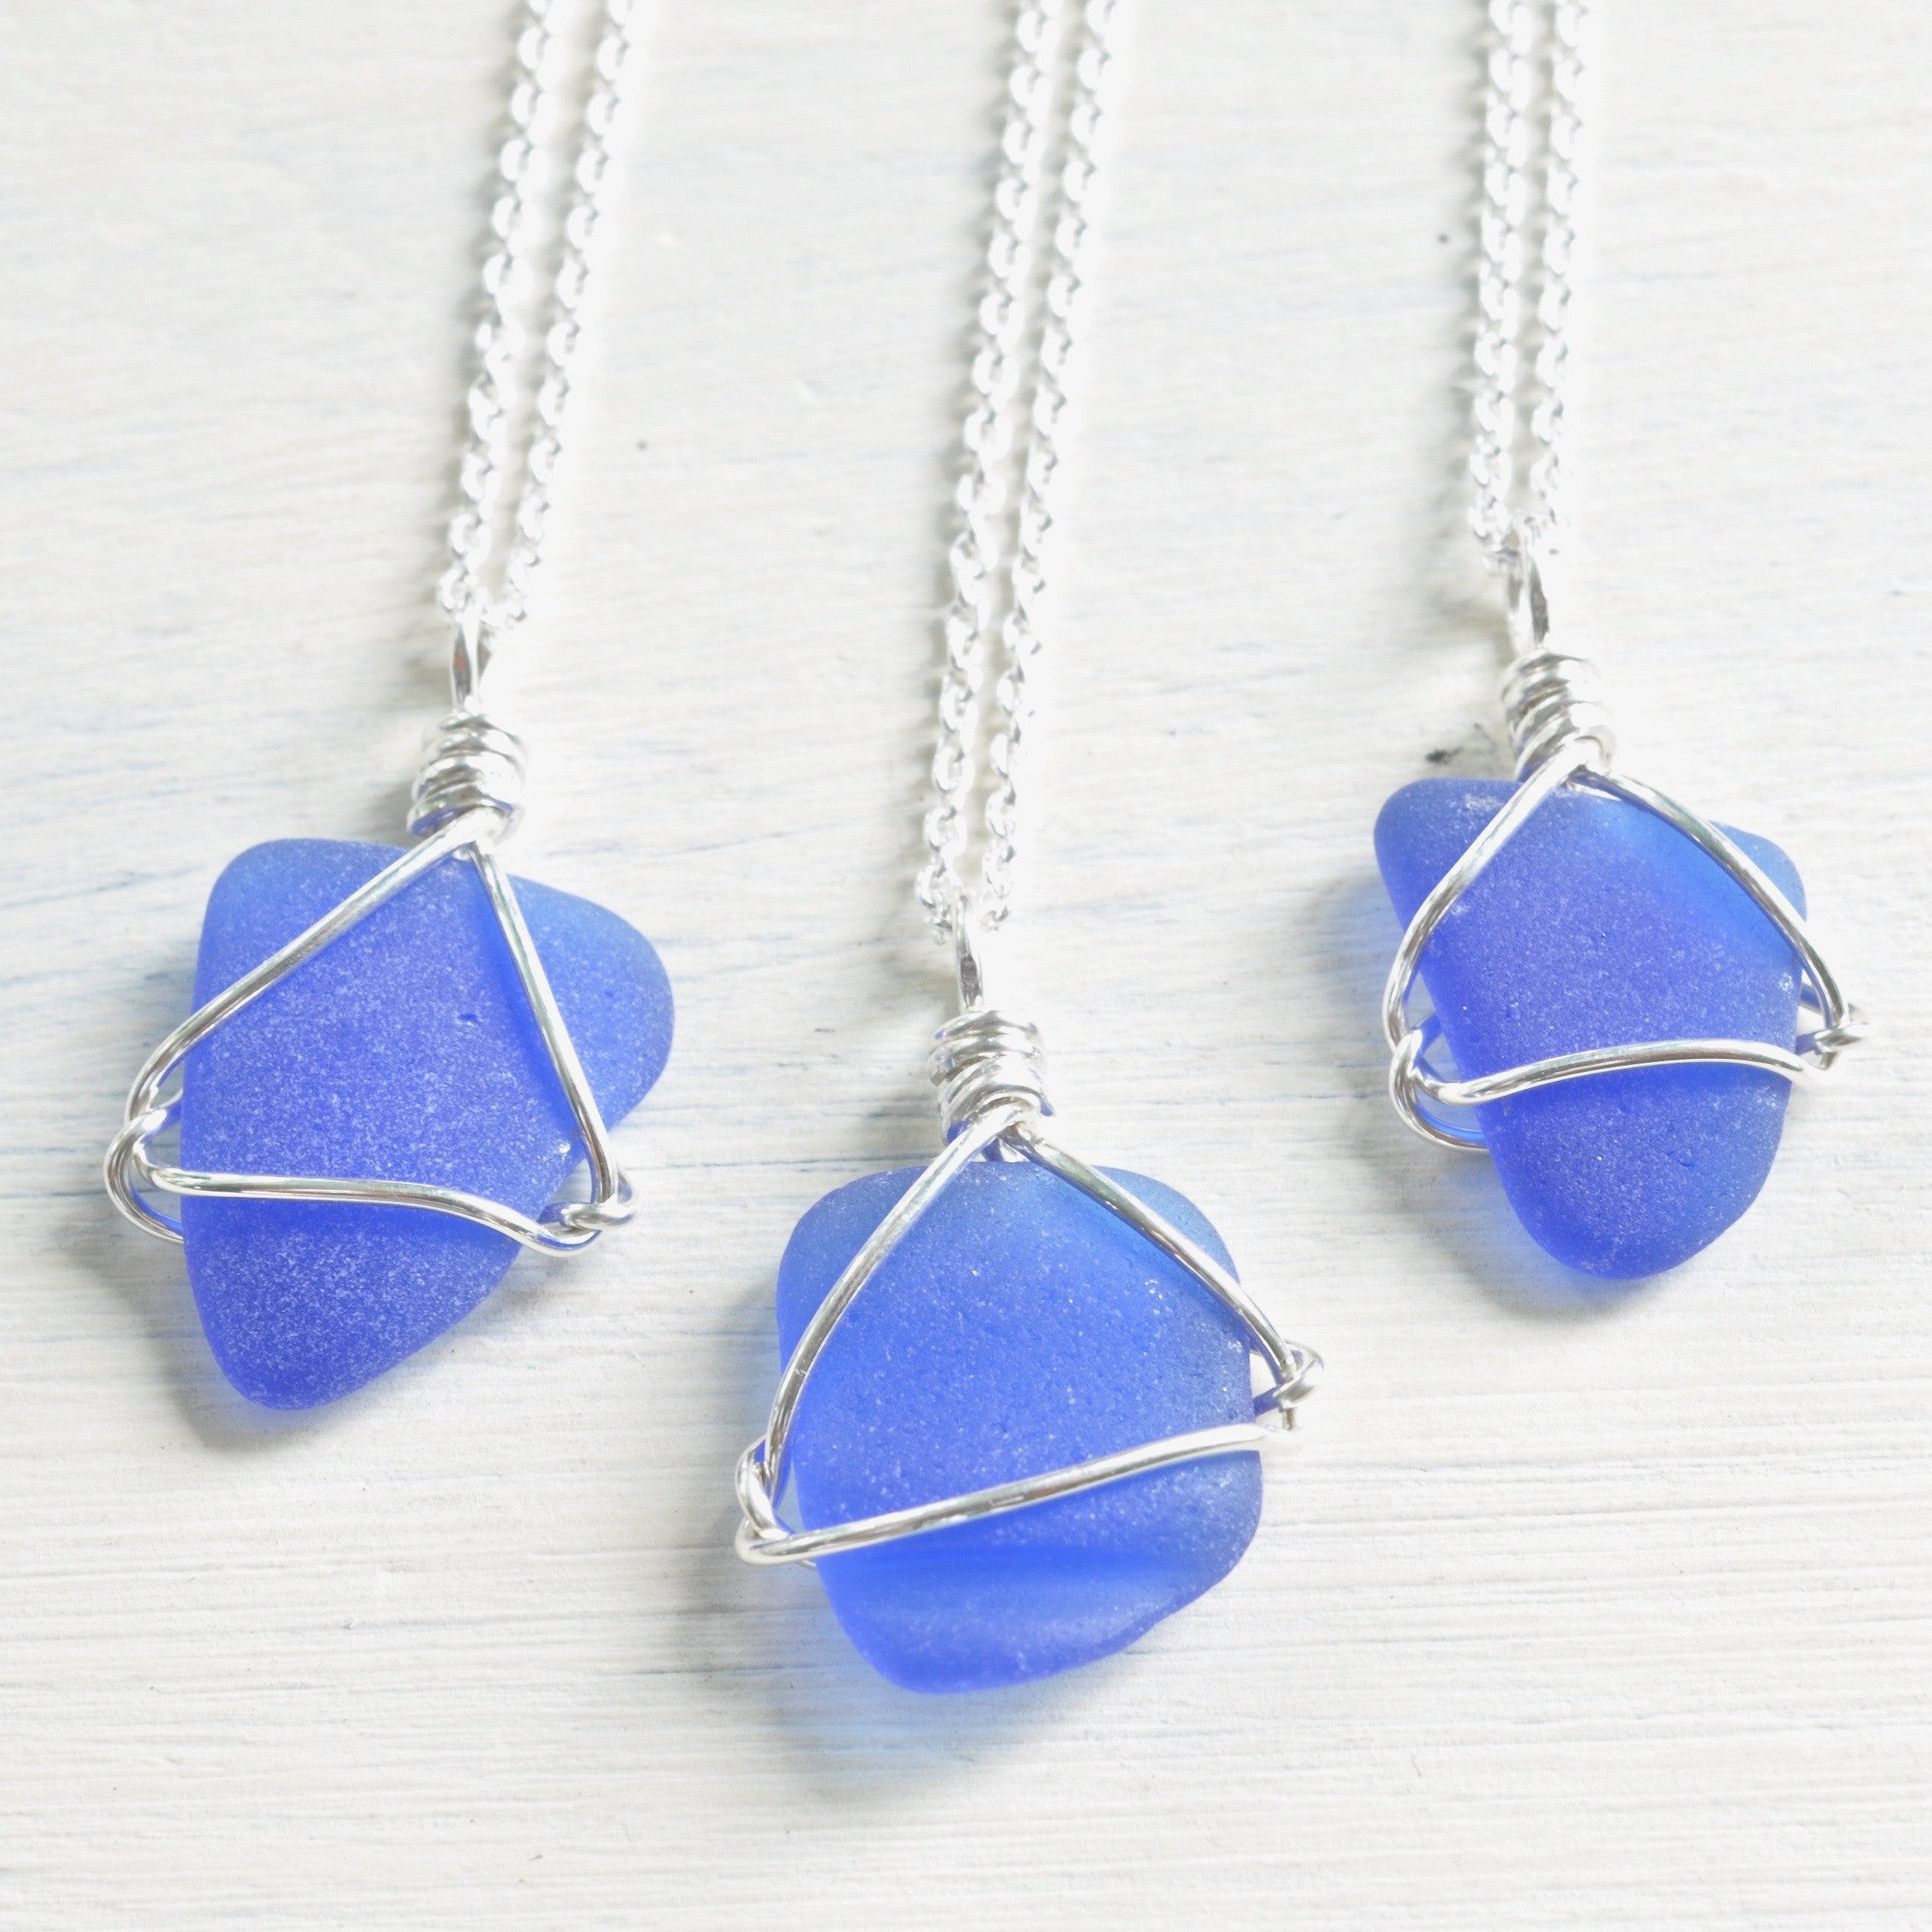 Blue Sea Glass Necklace, Pendant, Italian Sea Glass, Sterling Silver Chain,  Jewellery/jewelry, Recycled, Eco, Gift - Etsy